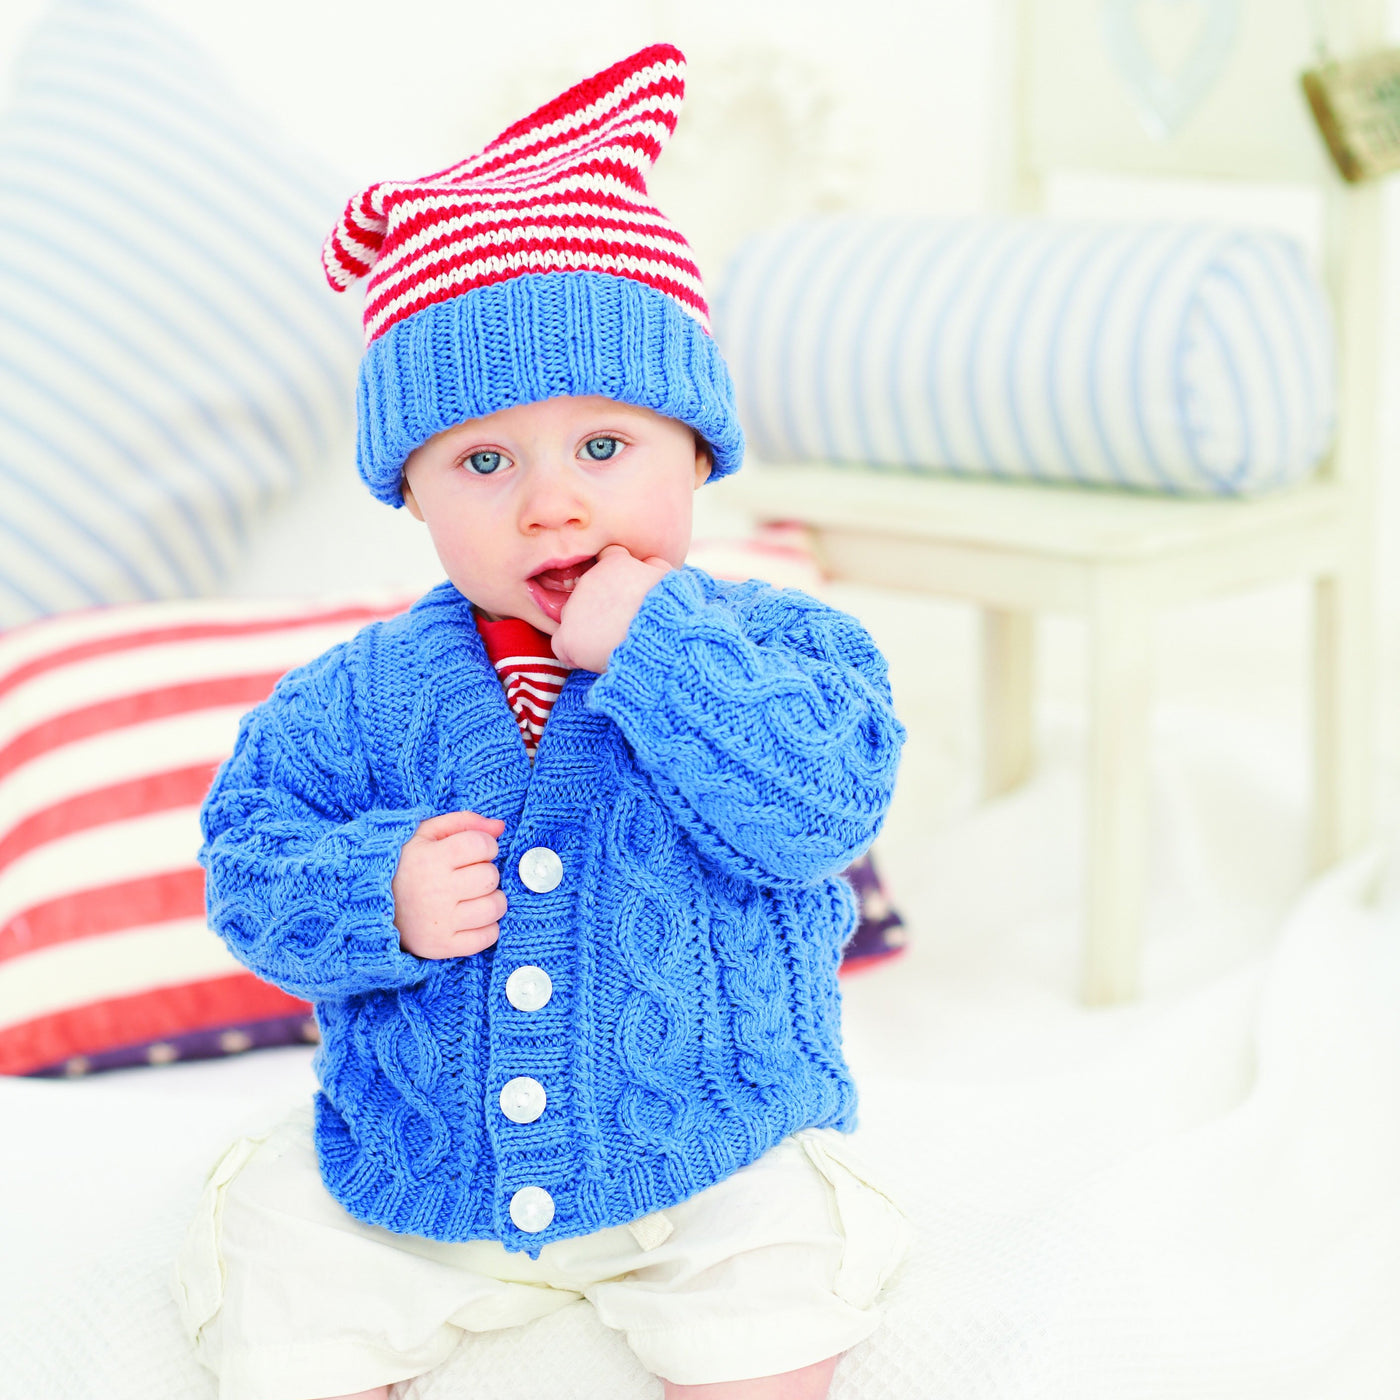 King Cole Baby Knitting Pattern Book 4 | Rosy Posy Petals